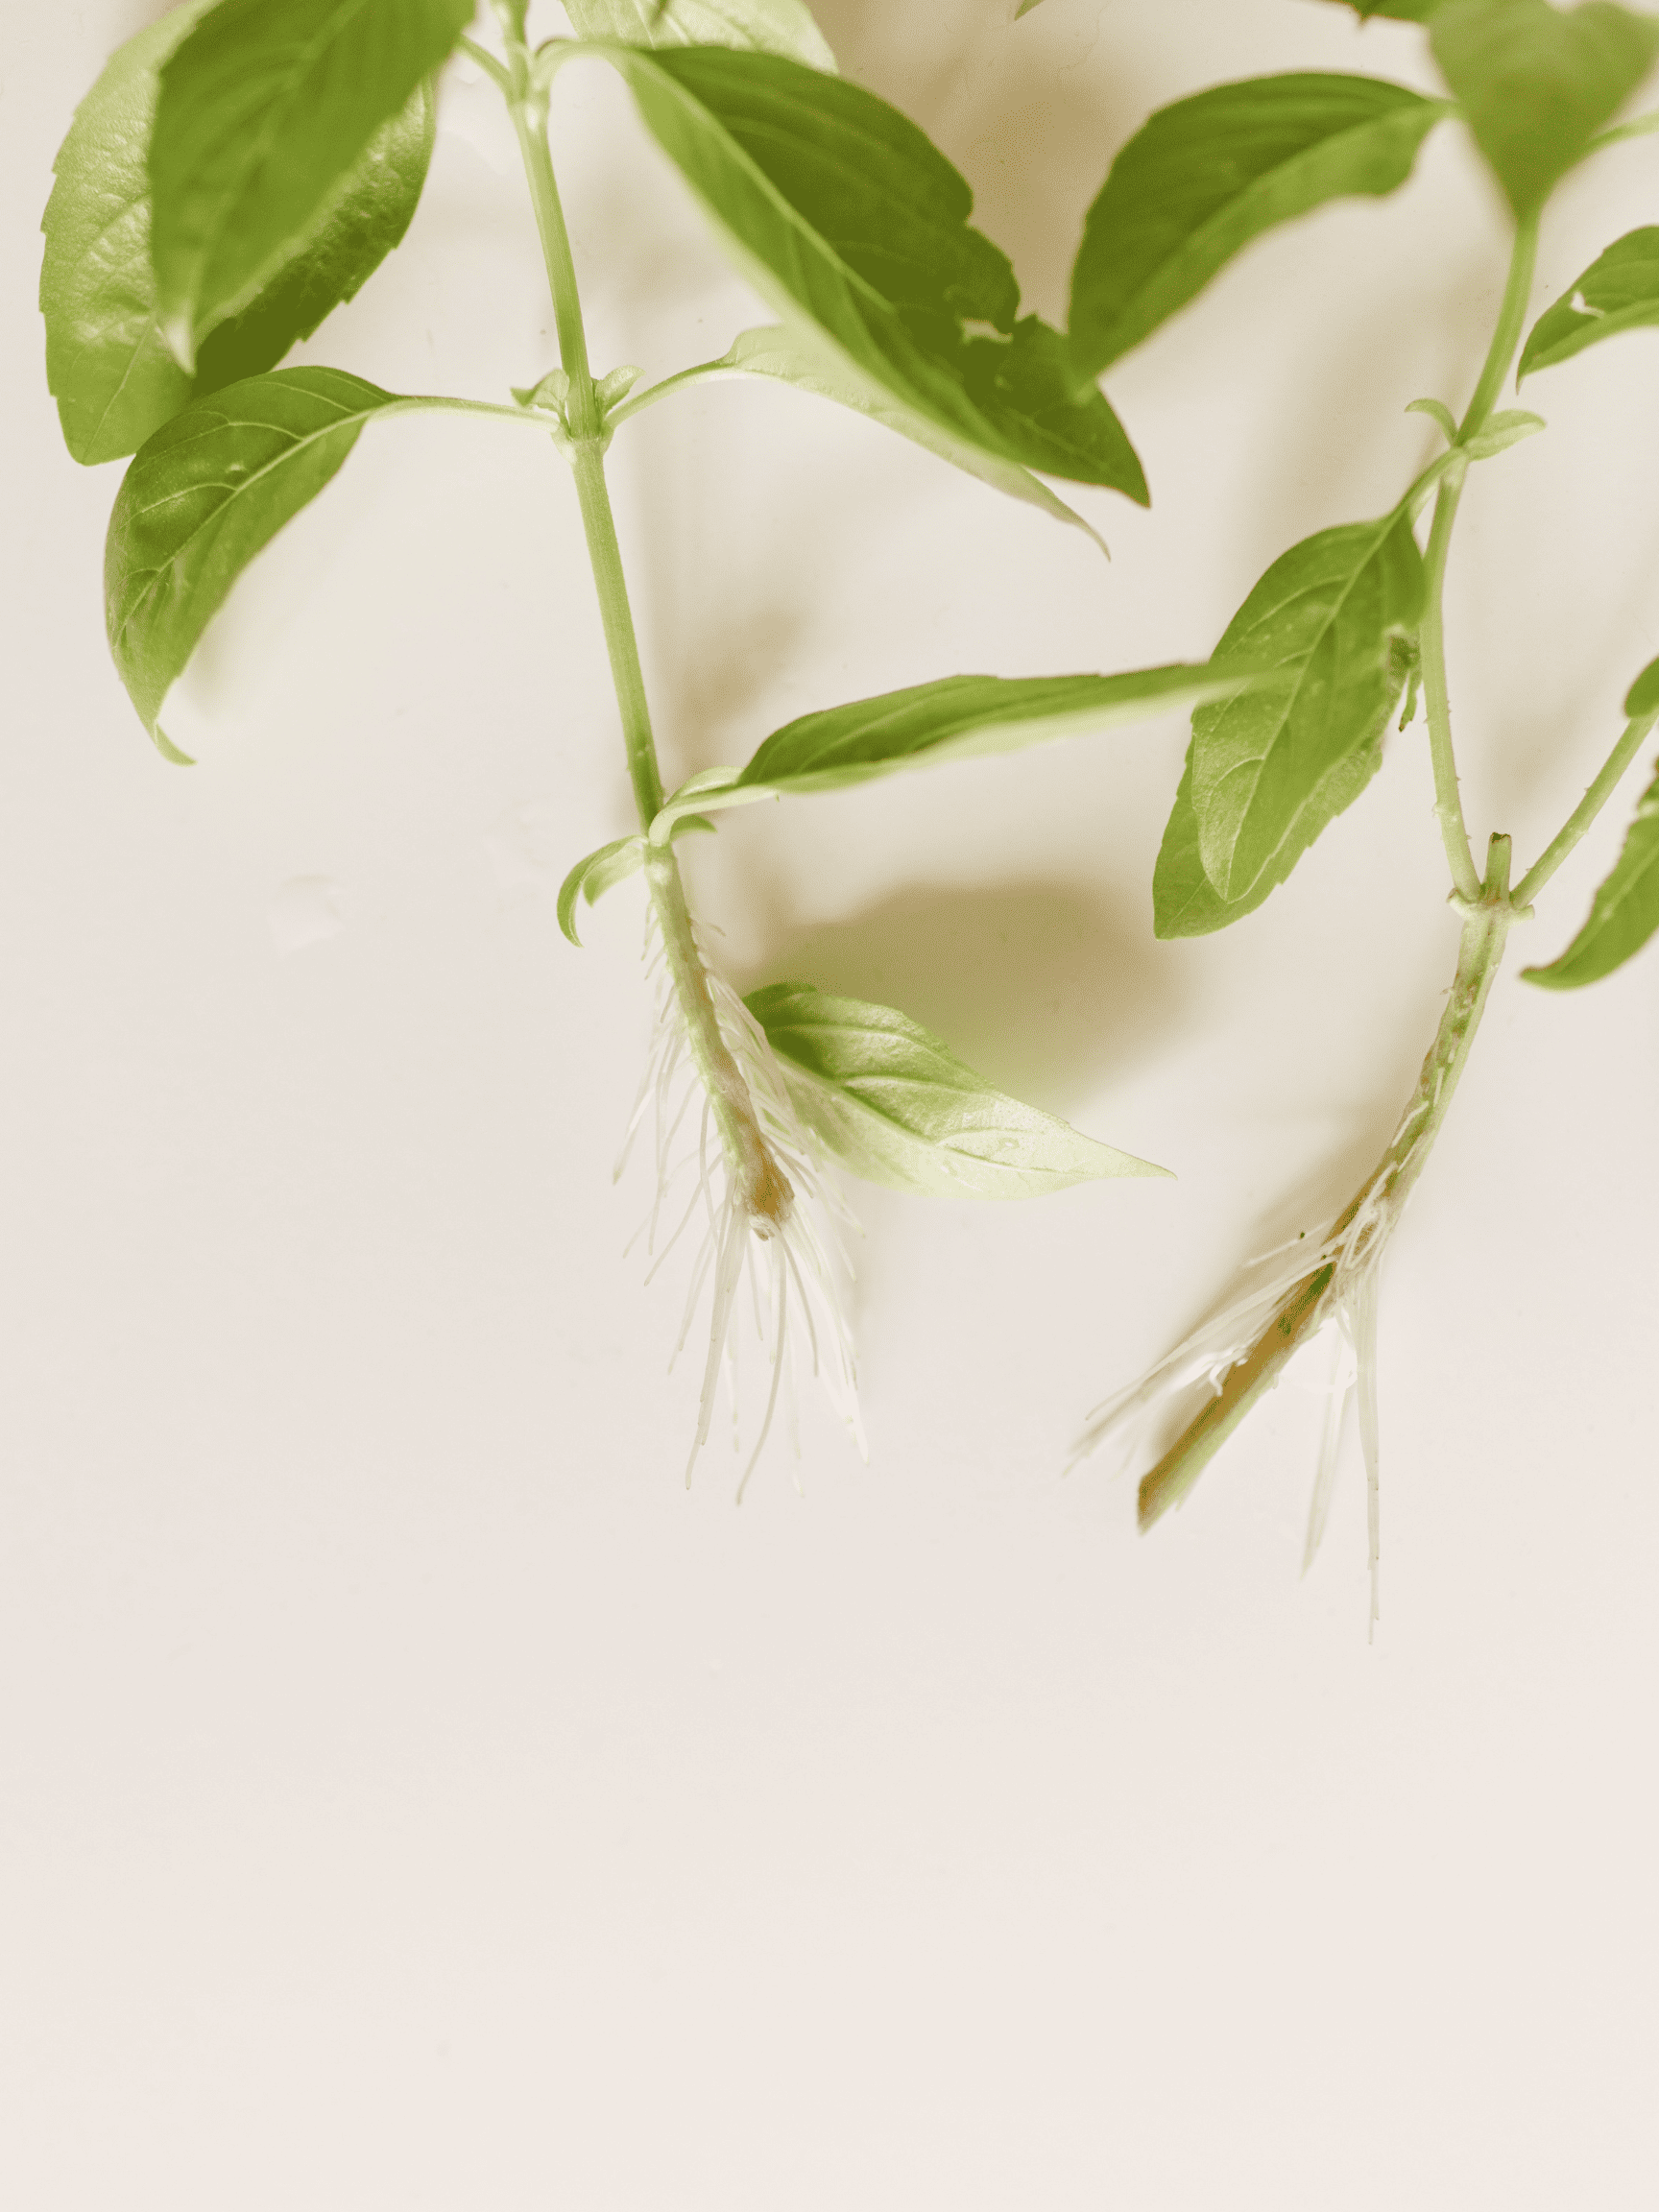 Two rooted basil cuttings on a cream background.